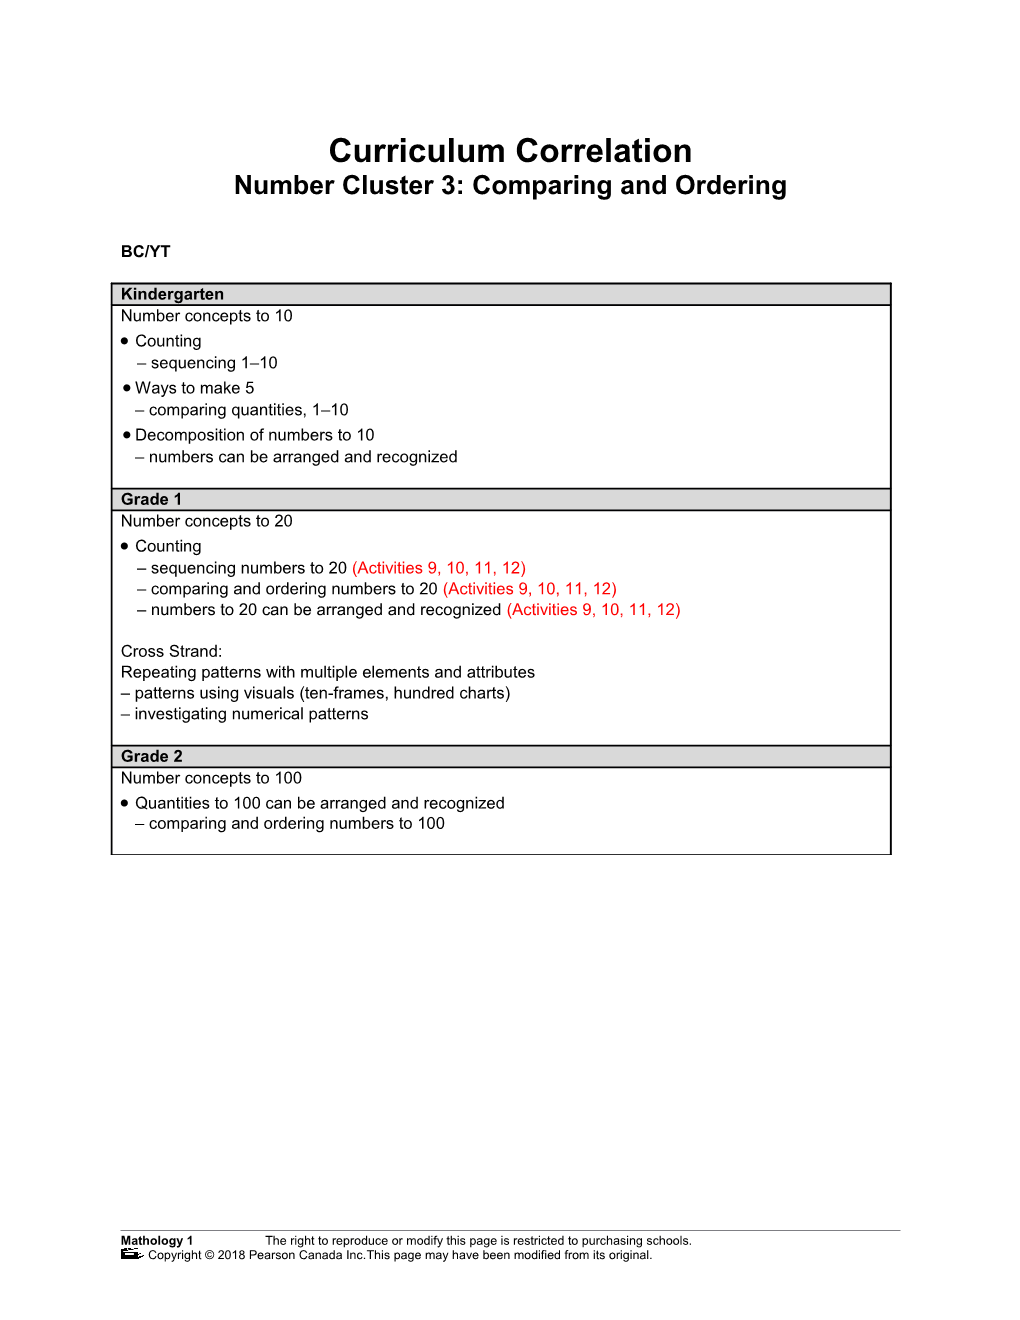 Number Cluster 3: Comparing and Ordering